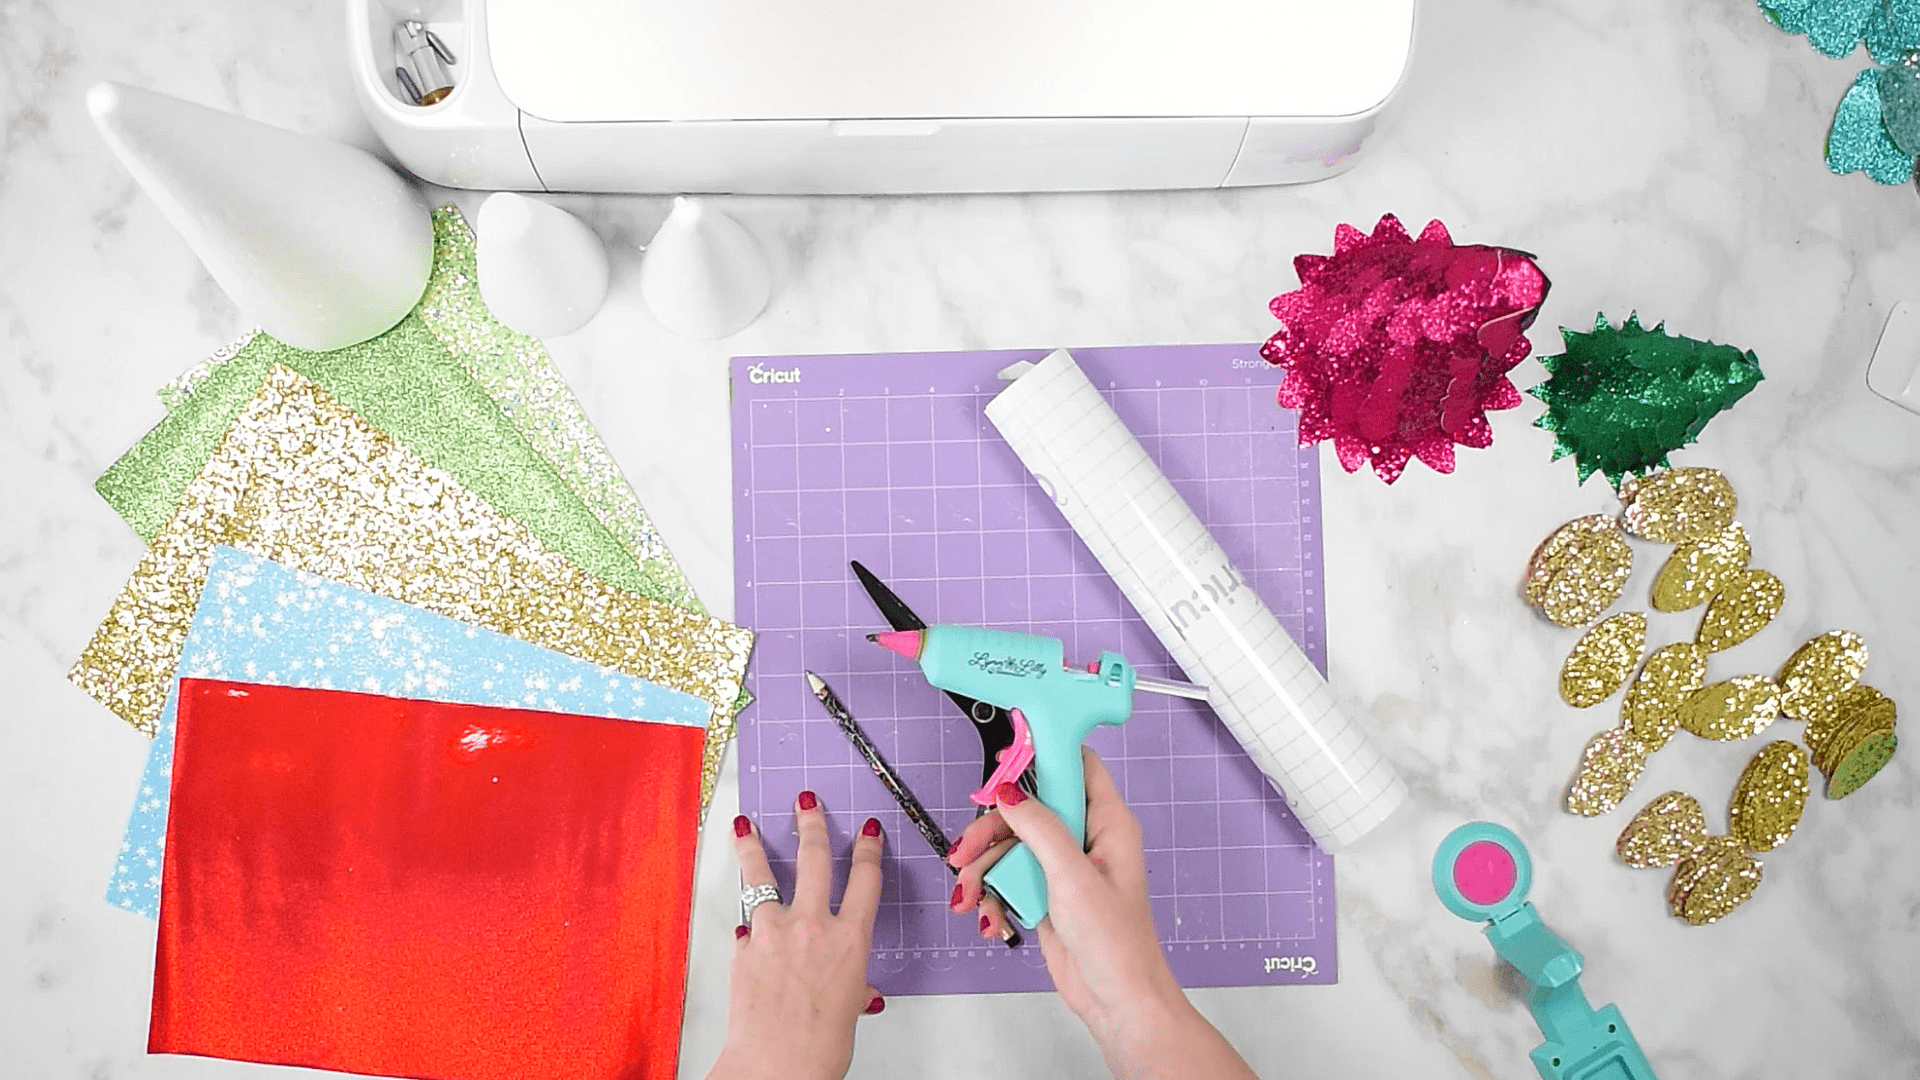 An overhead view of Abbi’s crafting station shows an array of craft supplies to make faux leather Christmas trees – styrofoam cones, sheets of glittery faux leather, and a Cricut cutting machine and accessories. Abbi’s hands are pictured holding a blue and pink glue gun.